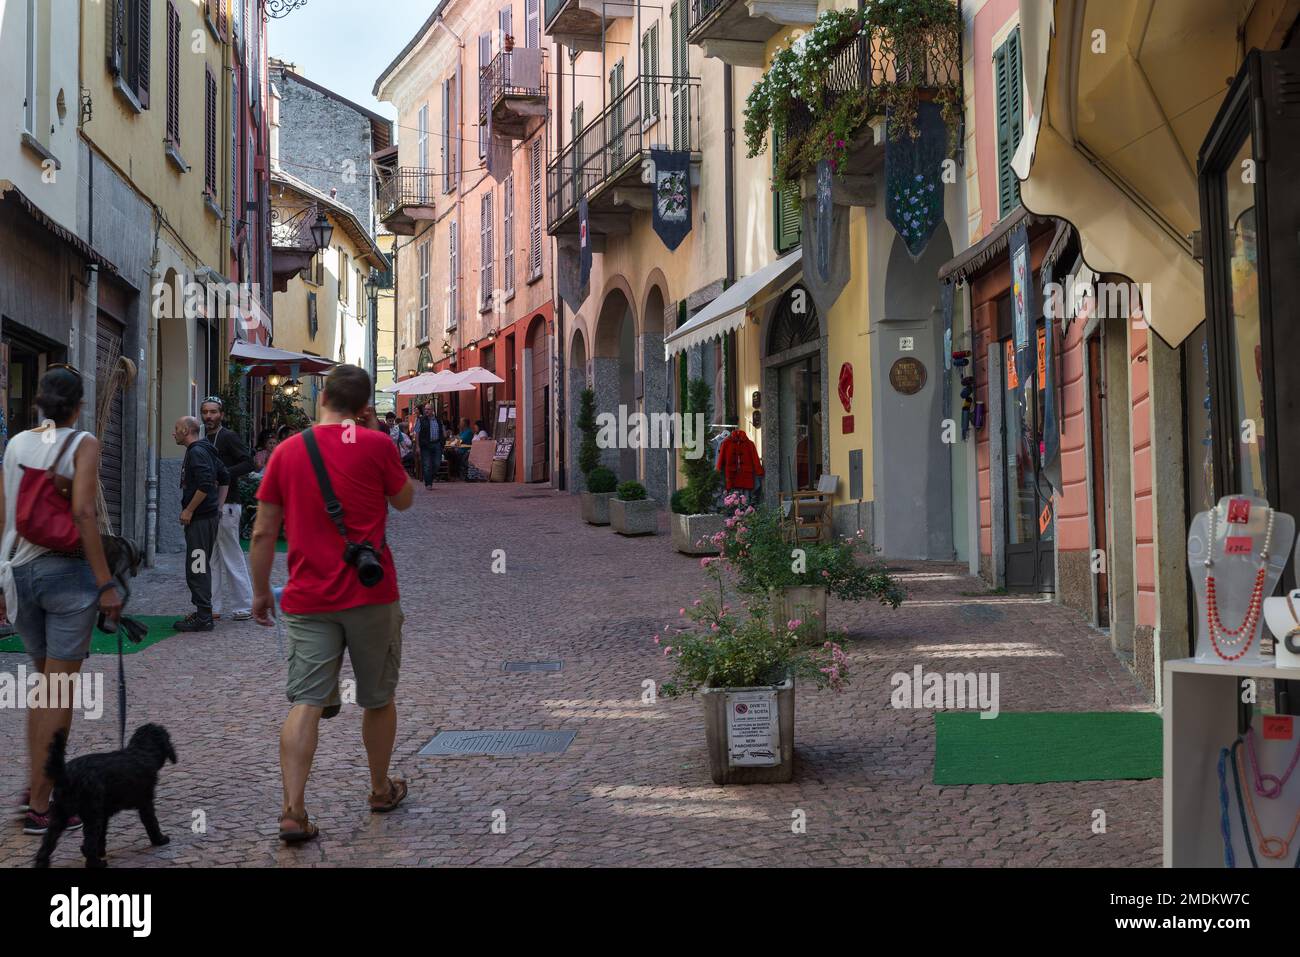 Picturesque cobbled alley with traditional restaurants, Luino, Italy Stock Photo